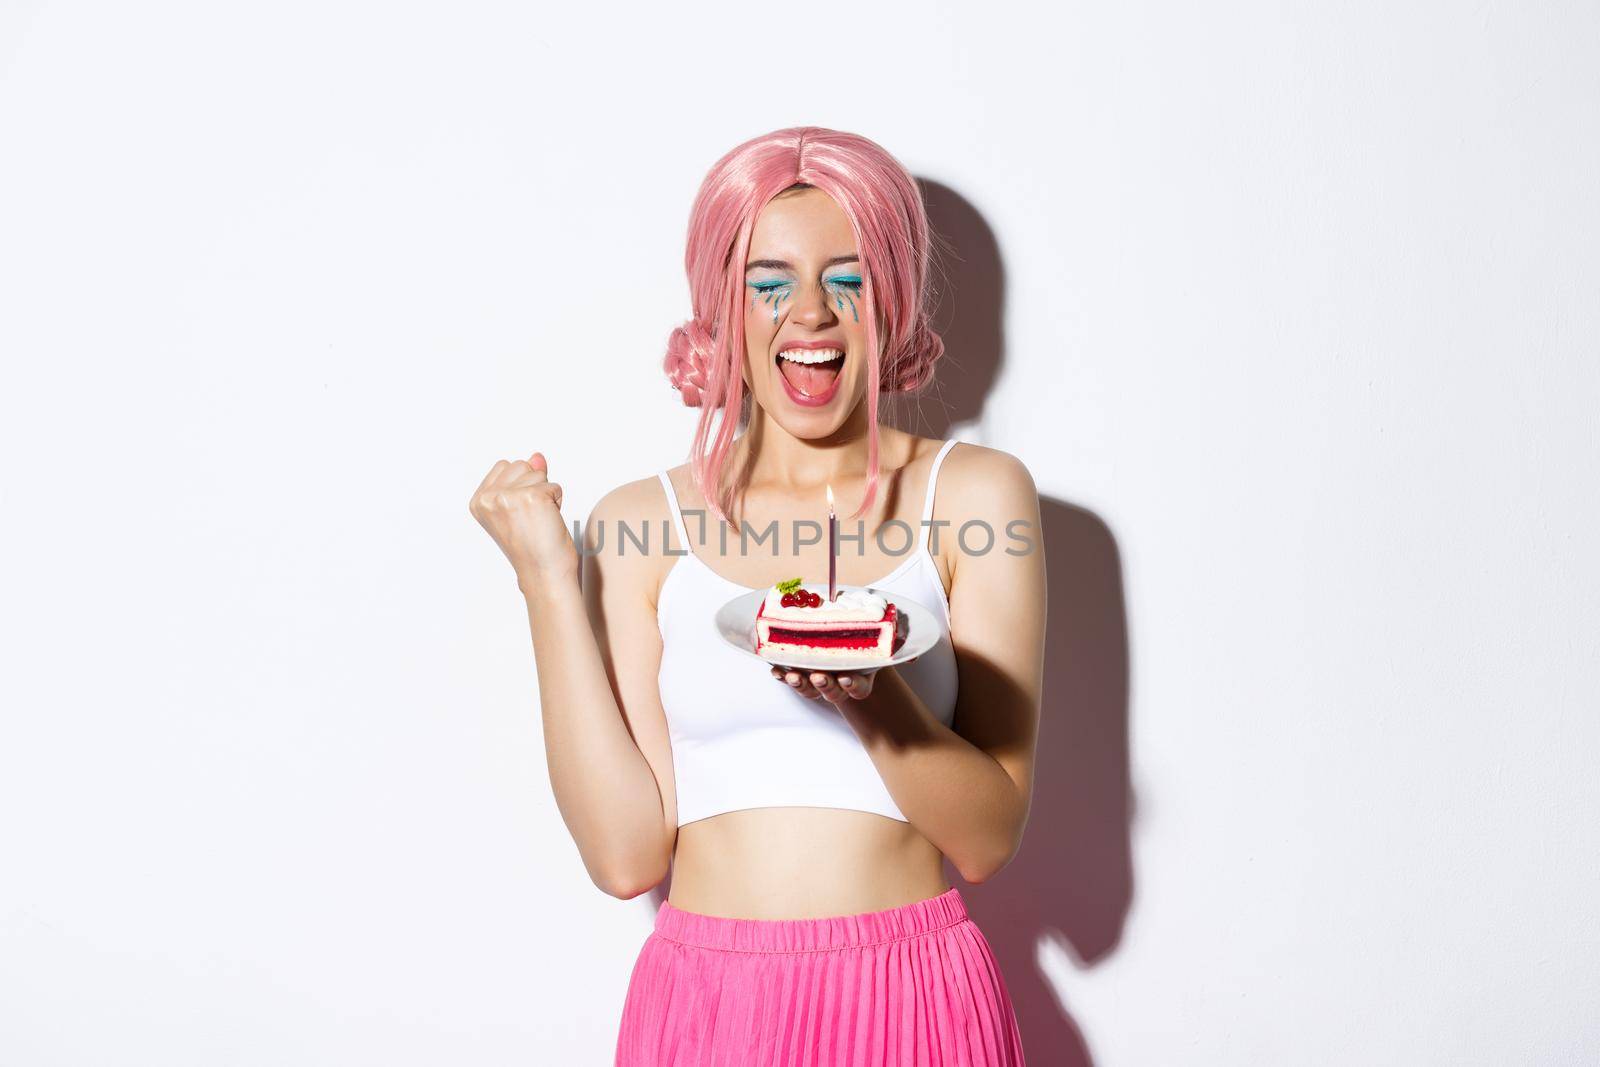 Portrait of cheerful smiling girl celebrating her birthday, wearing pink wig, holding b-day cake and shouting of joy, standing over white background.